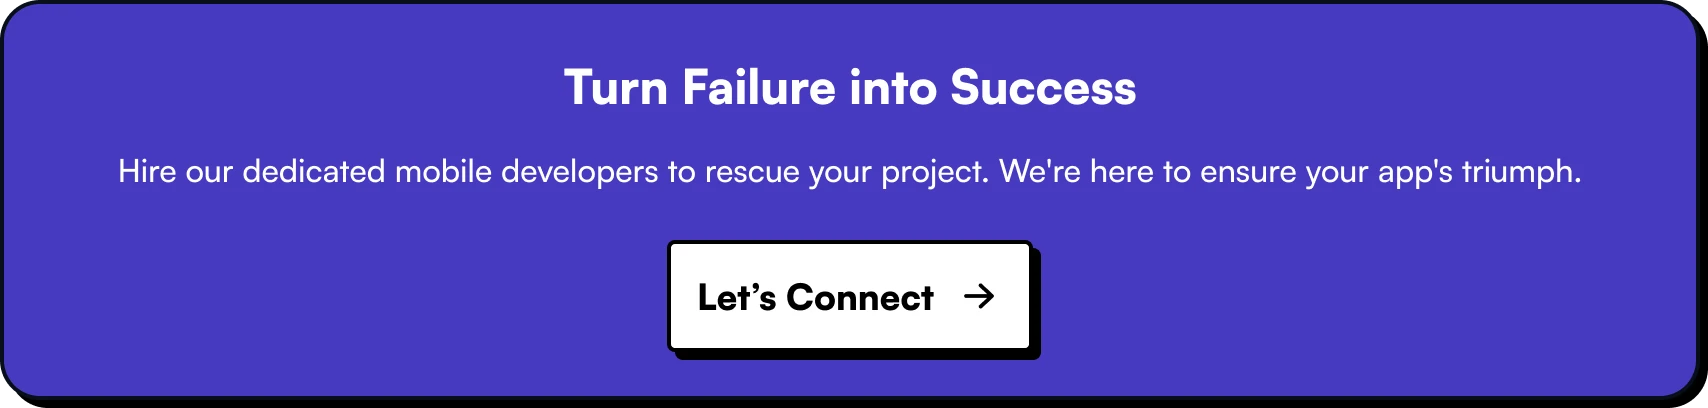 Turn Failure into Success. Hire dedicated mobile developers from SolGuruz to rescue your project. 